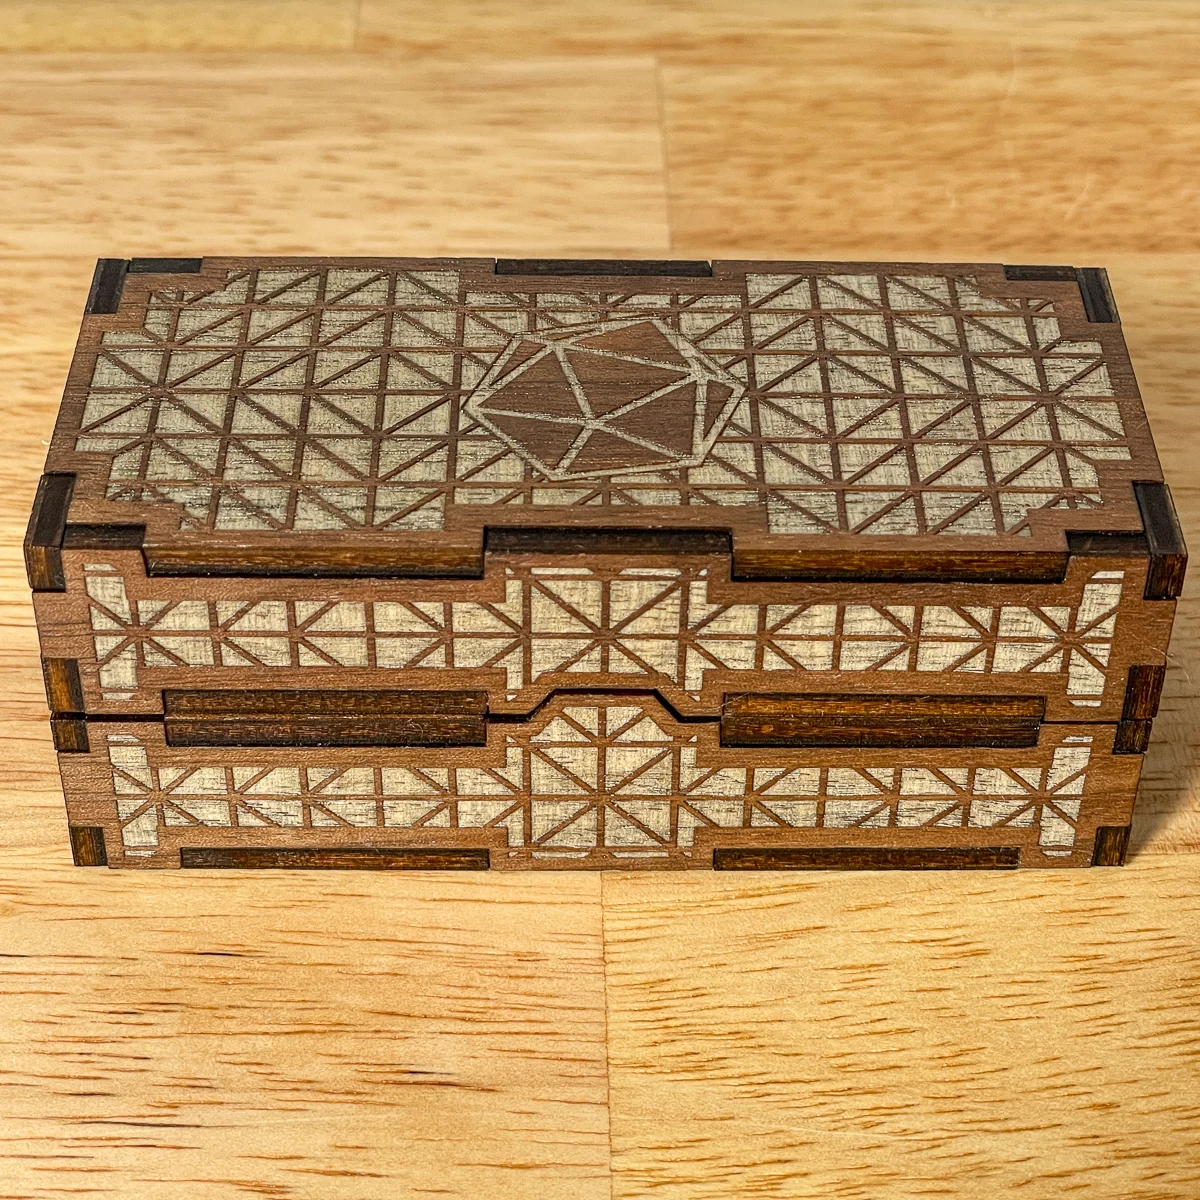 DIY dice box with D20 dice engraved on top